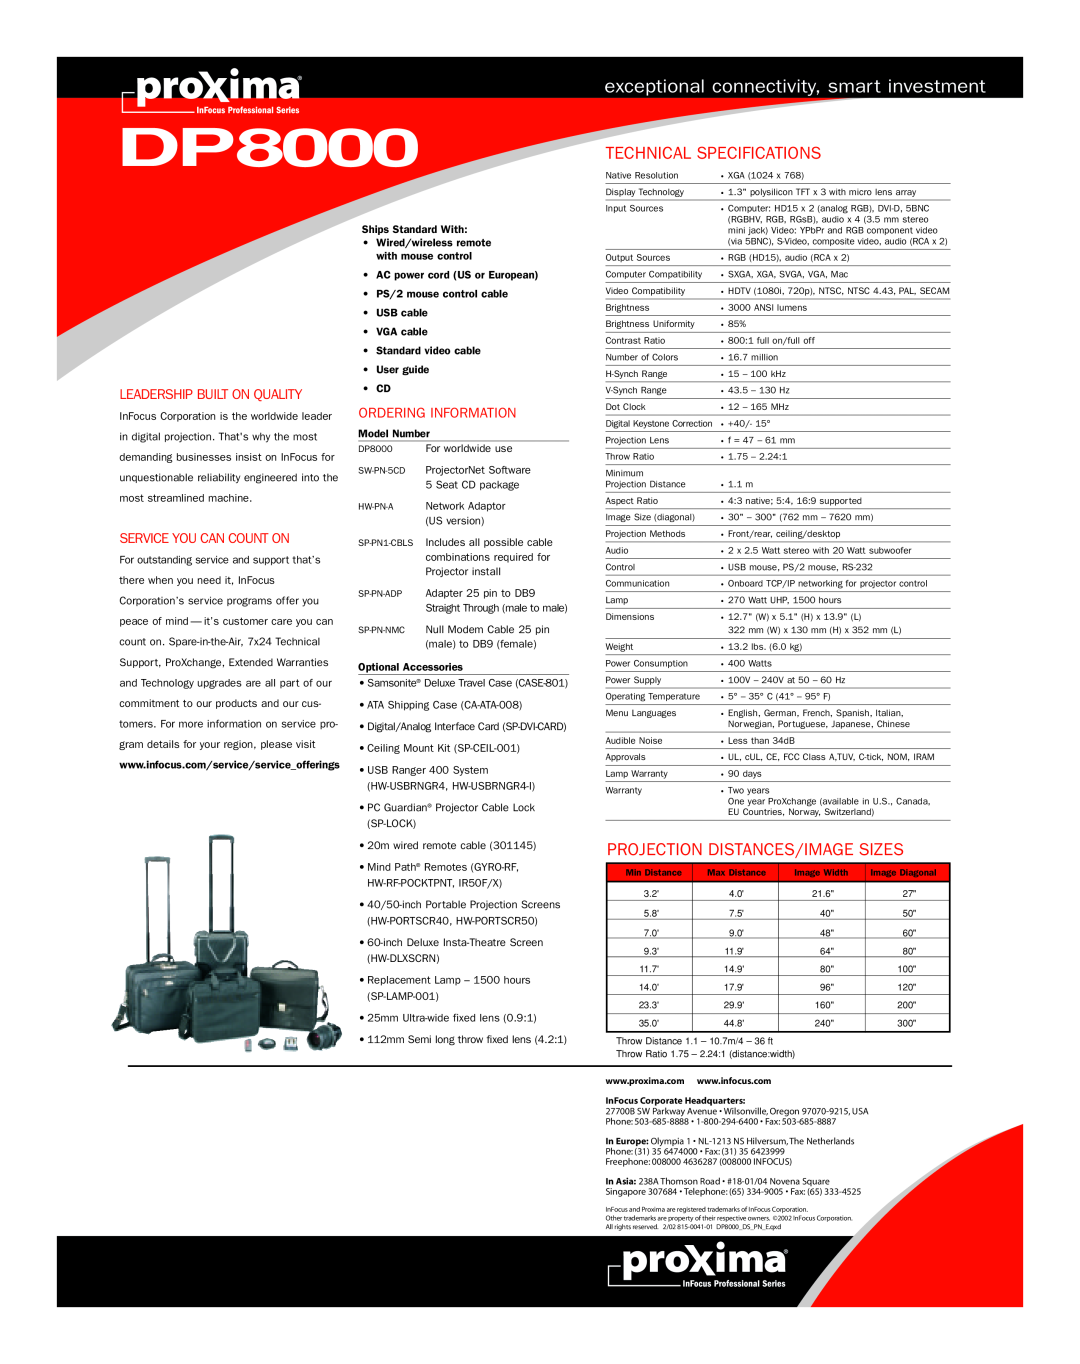 InFocus DP8000 exceptional connectivity, smart investment, Technical Specifications, Projection Distances/Image Sizes 